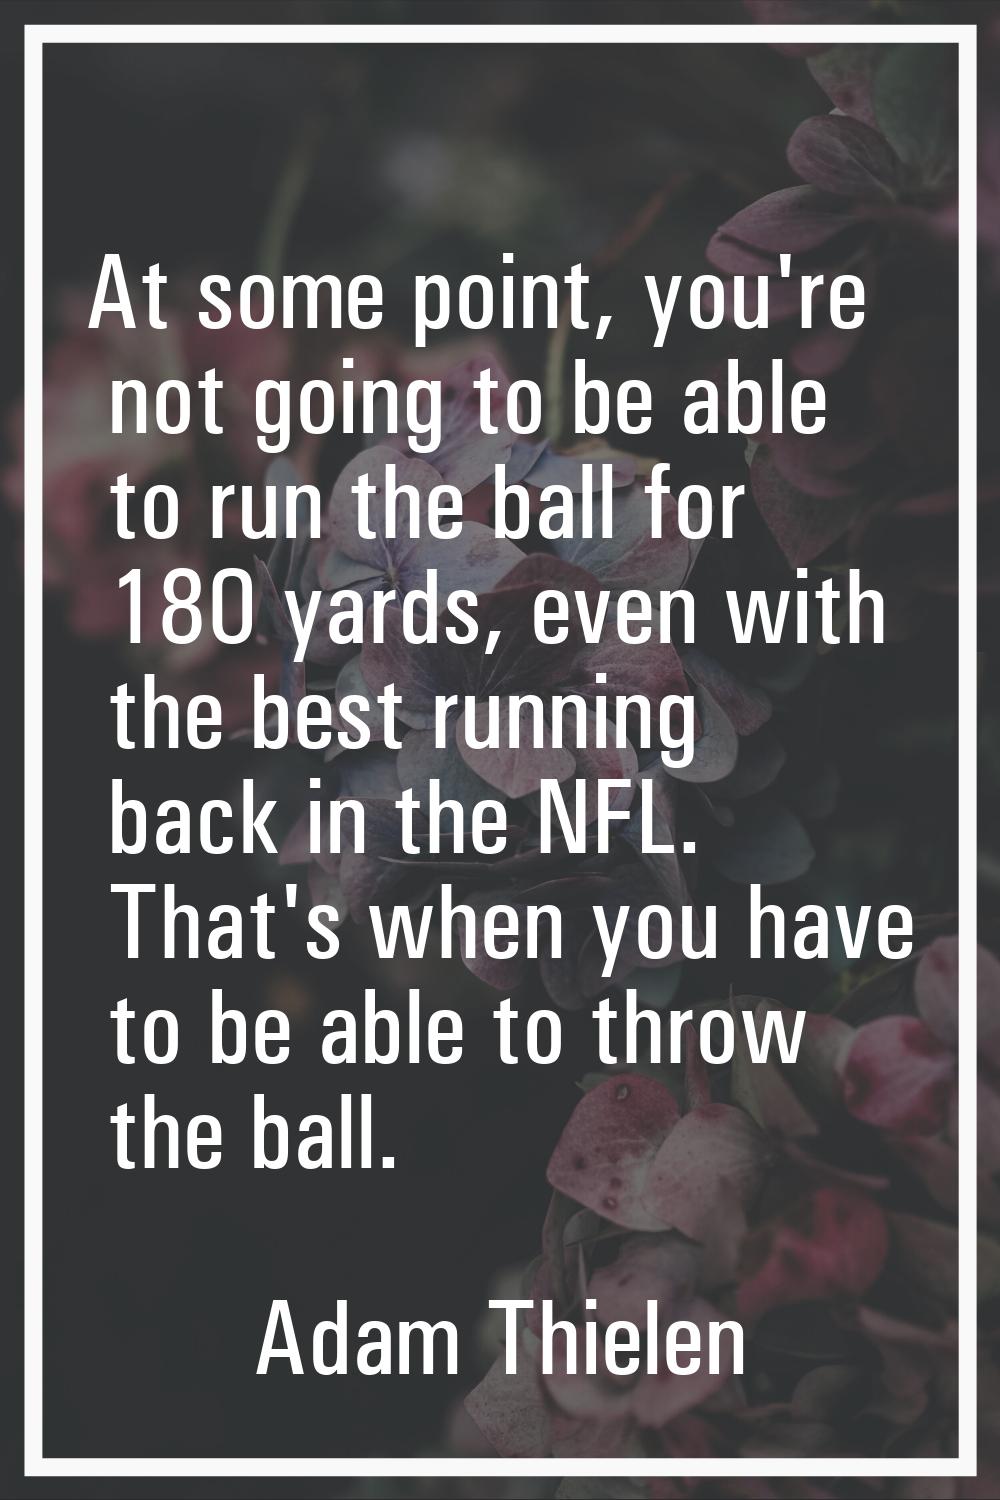 At some point, you're not going to be able to run the ball for 180 yards, even with the best runnin